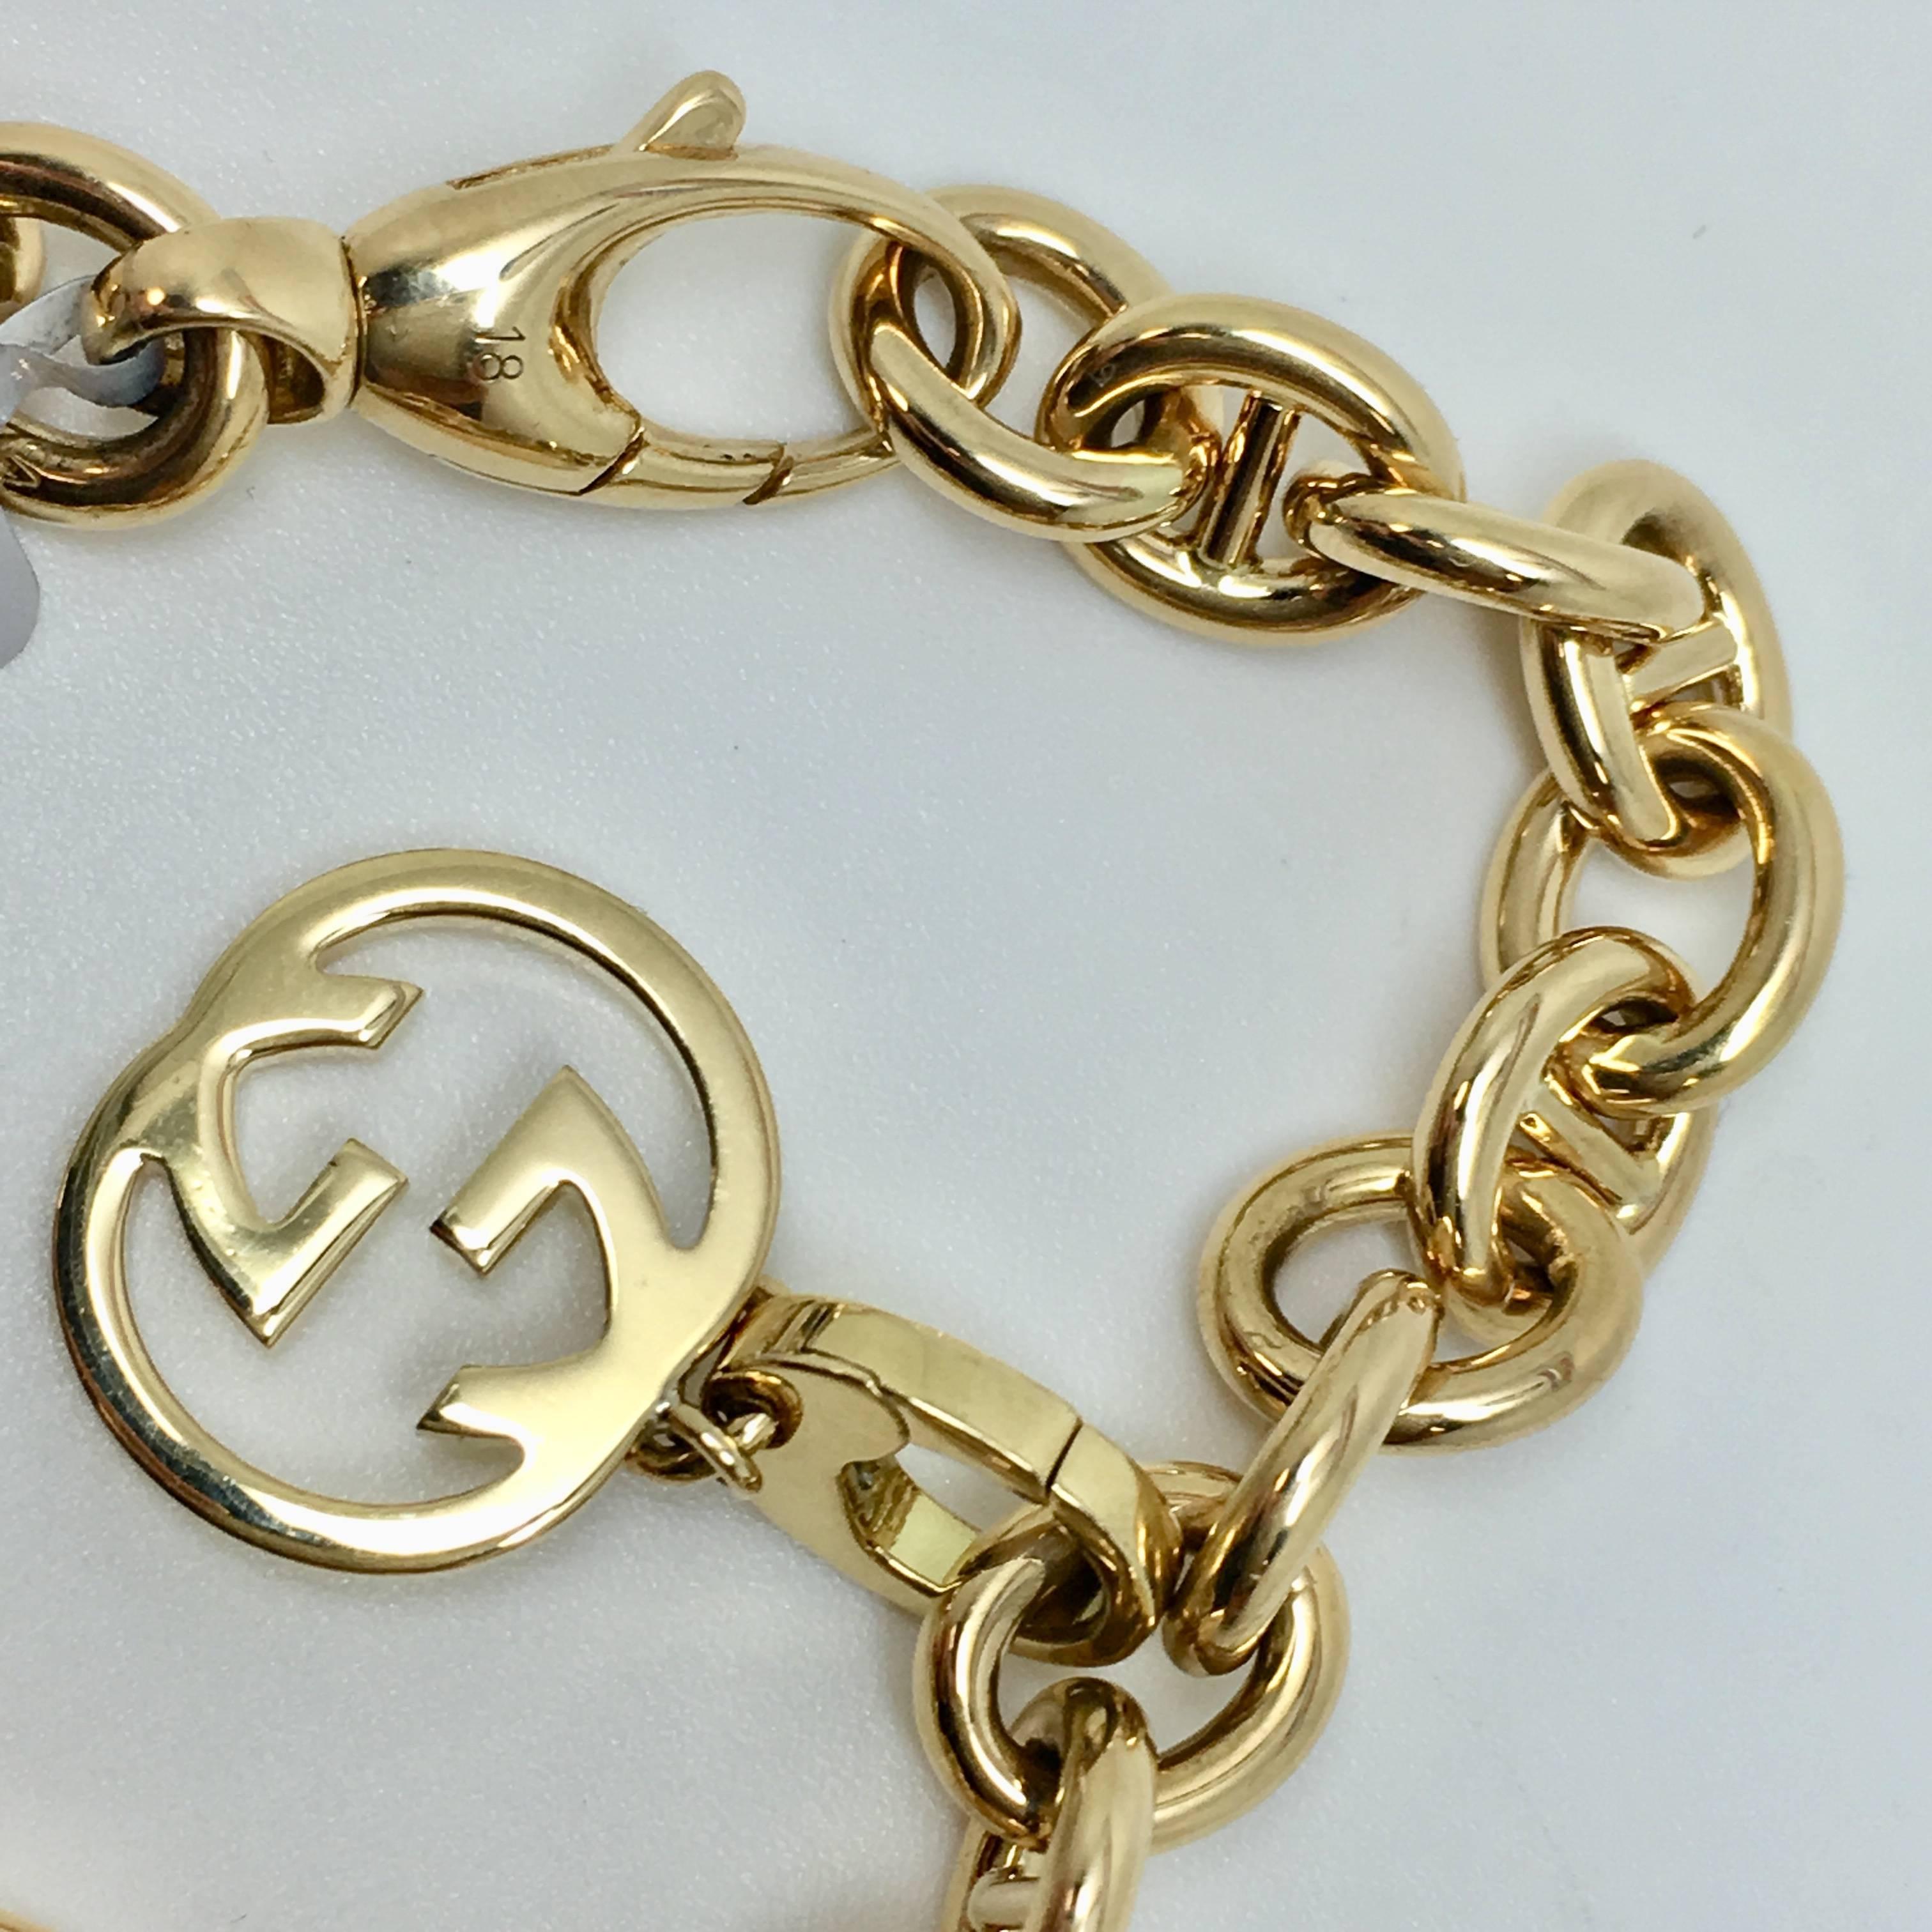 Gucci Link 18 Karat Yellow Gold Bracelet In Excellent Condition For Sale In Ottawa, Ontario